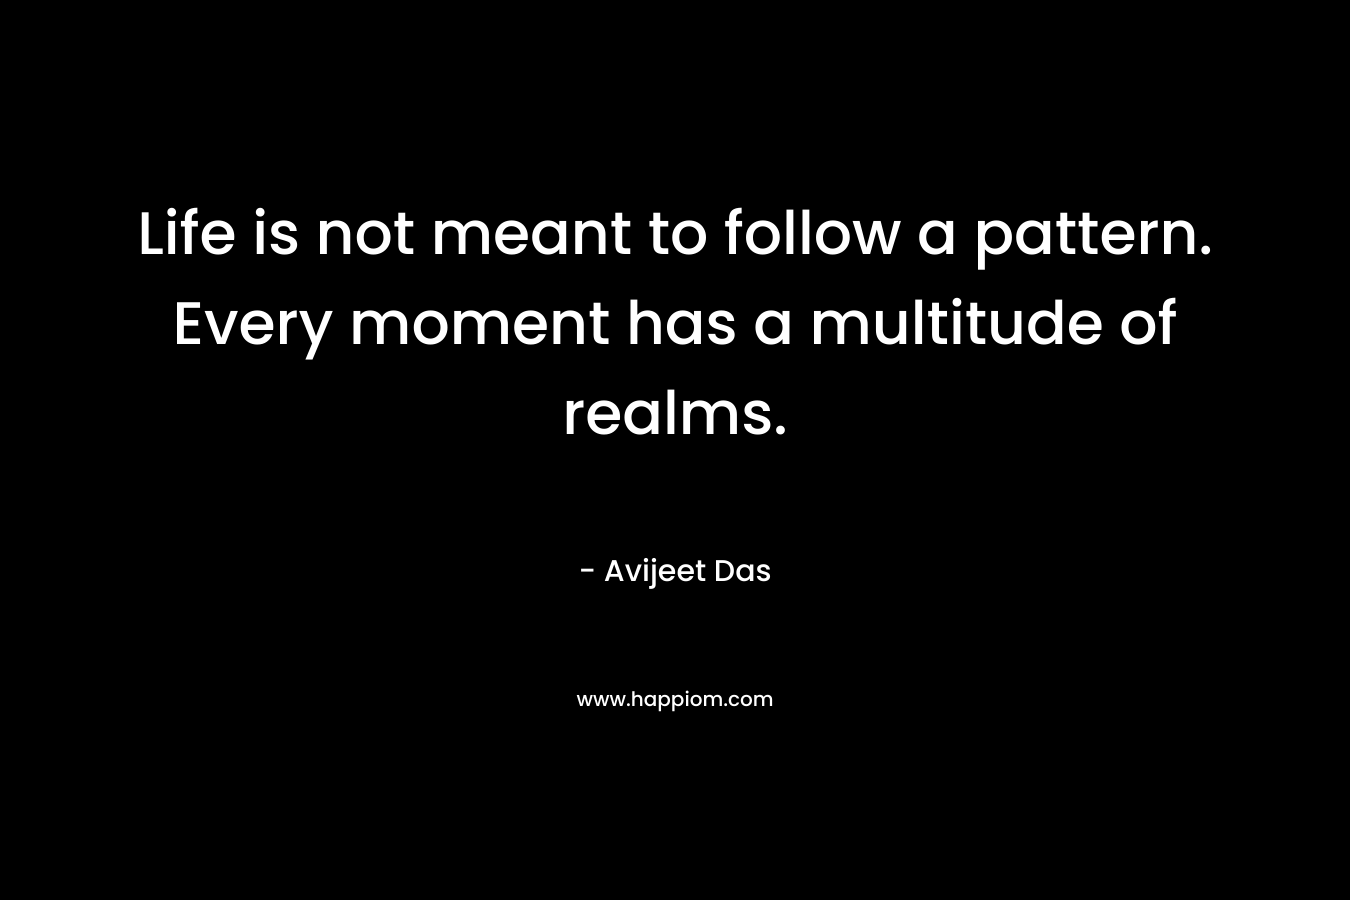 Life is not meant to follow a pattern. Every moment has a multitude of realms.